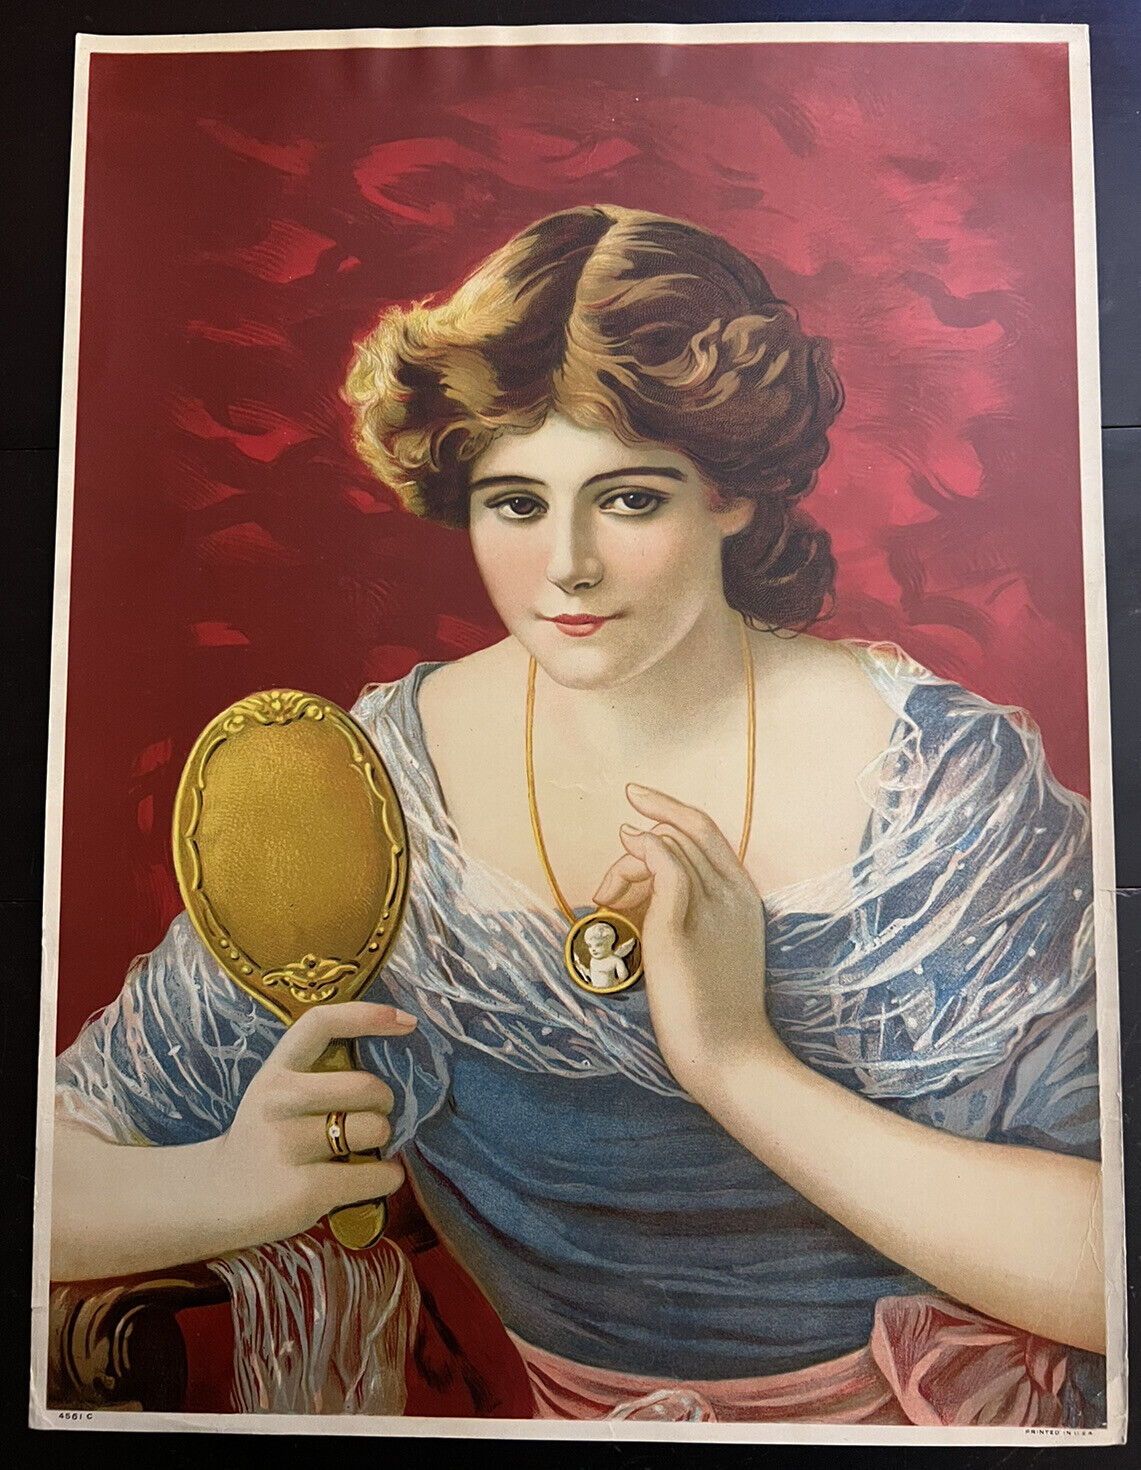 ATQ c1910s Calendar Sales Sample Pinup Poster Woman Mirror Cameo on Vibrant Red 